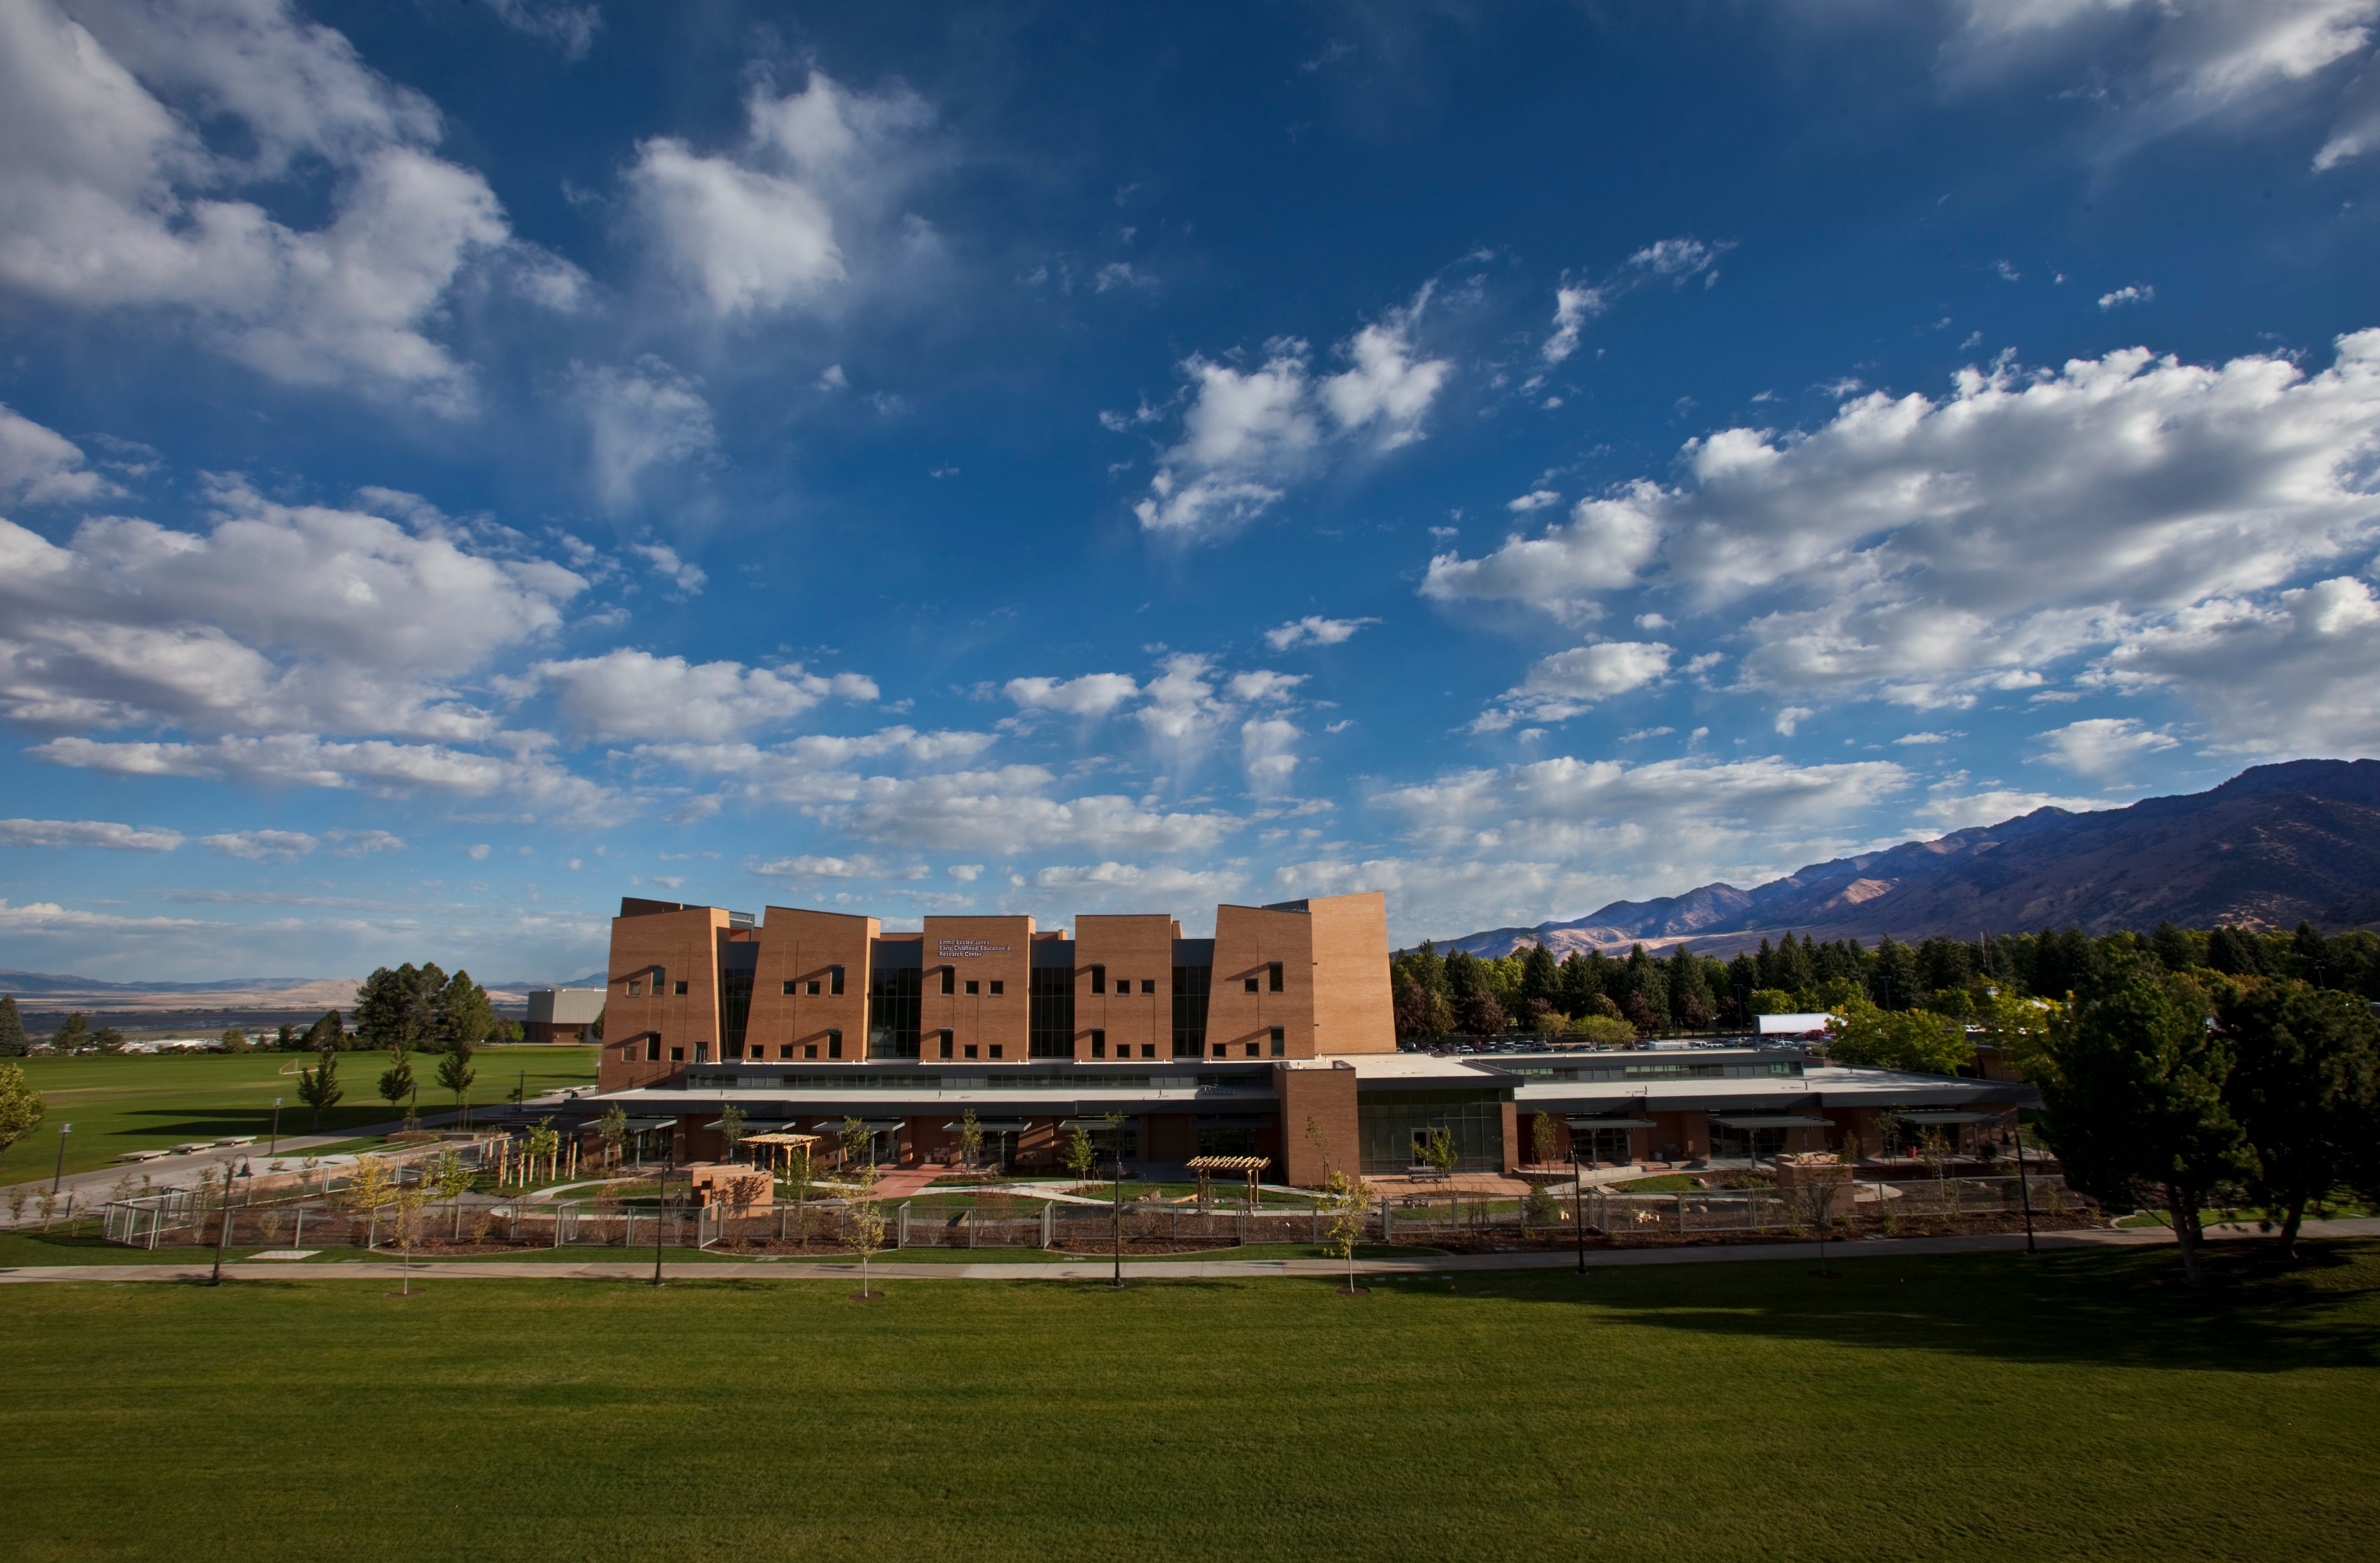 USU Emma Eccles Jones Early Childhood Education and Research Center